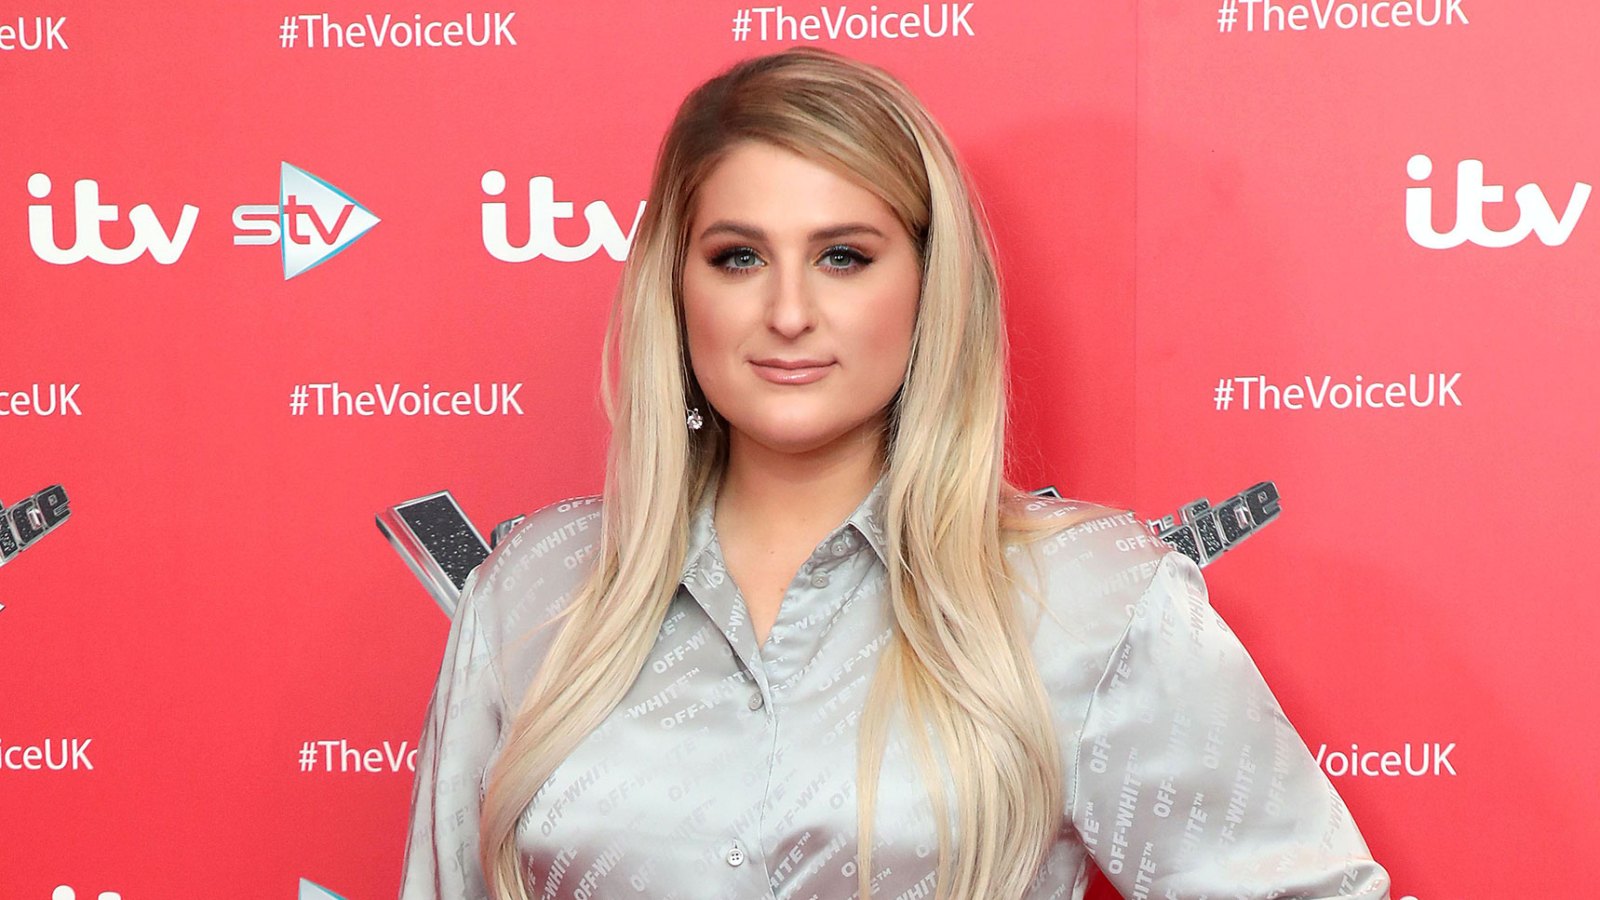 Meghan Trainor Then and Now: What the Songstress Has Been Up To